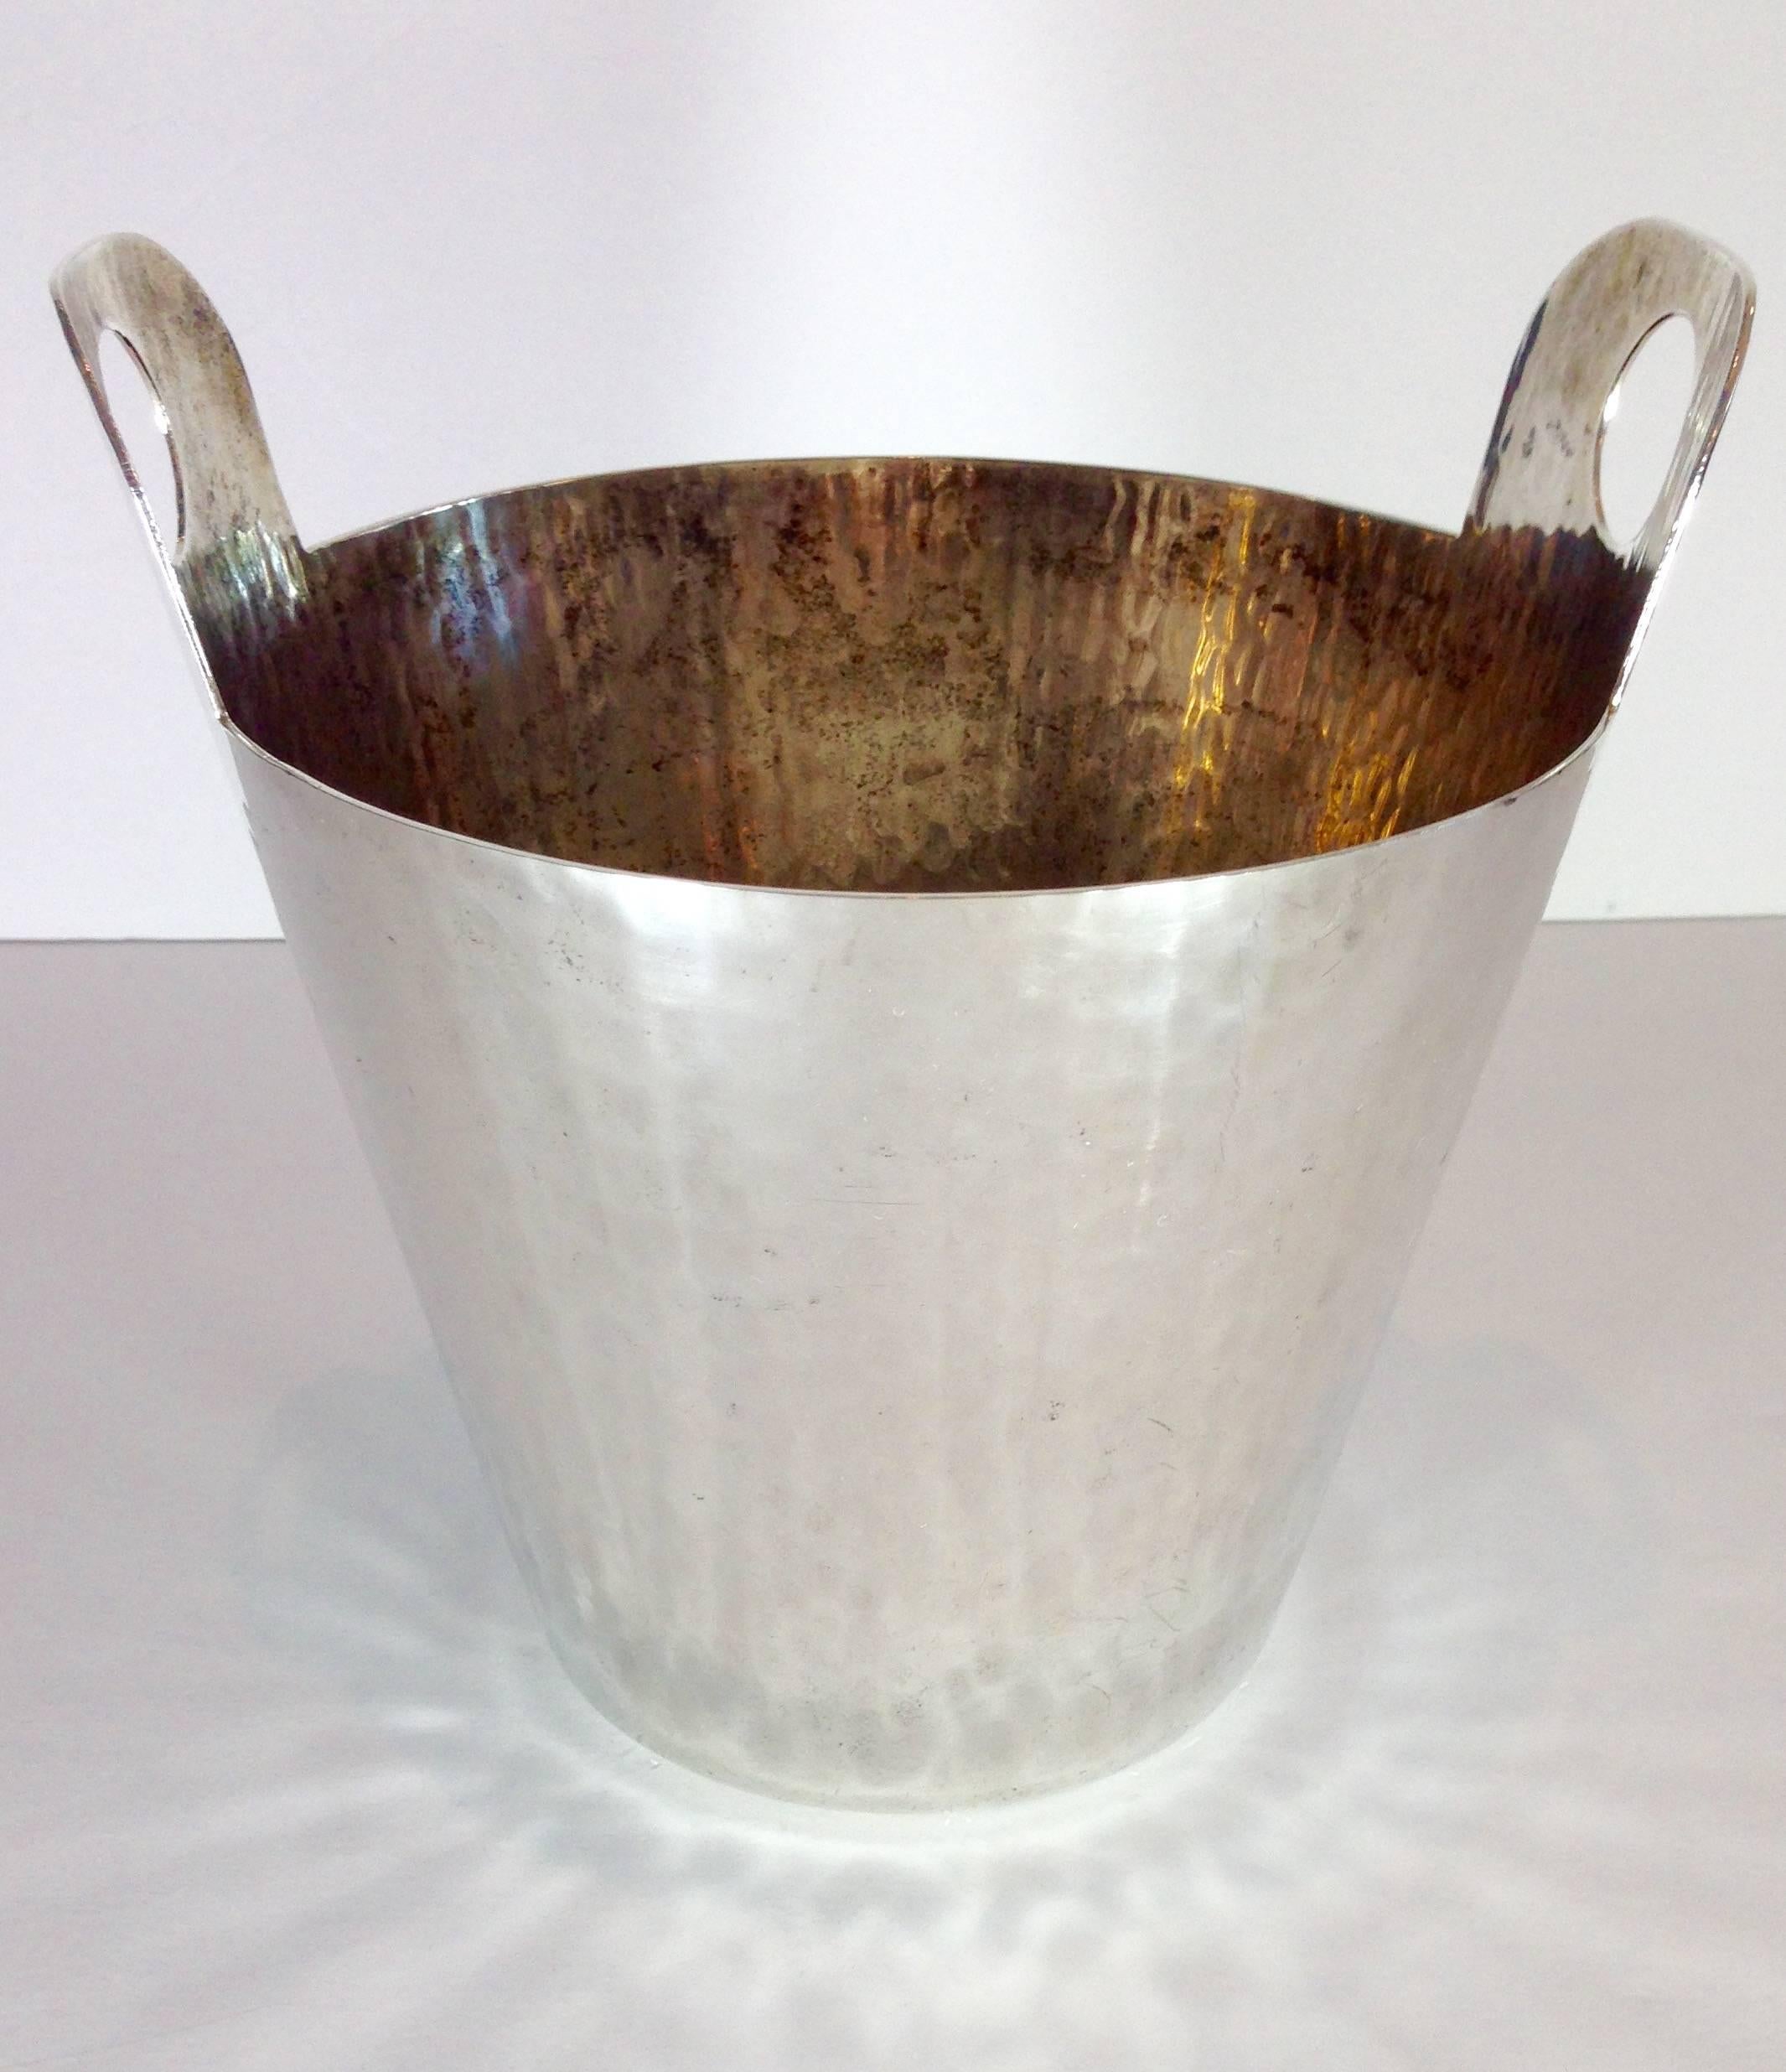 Italian hammered silver plate champagne bucket with cut-out handles. Signed on the underside, hand finished, Italy, Calegaro.
Monogrammed with previous owner’s initials.